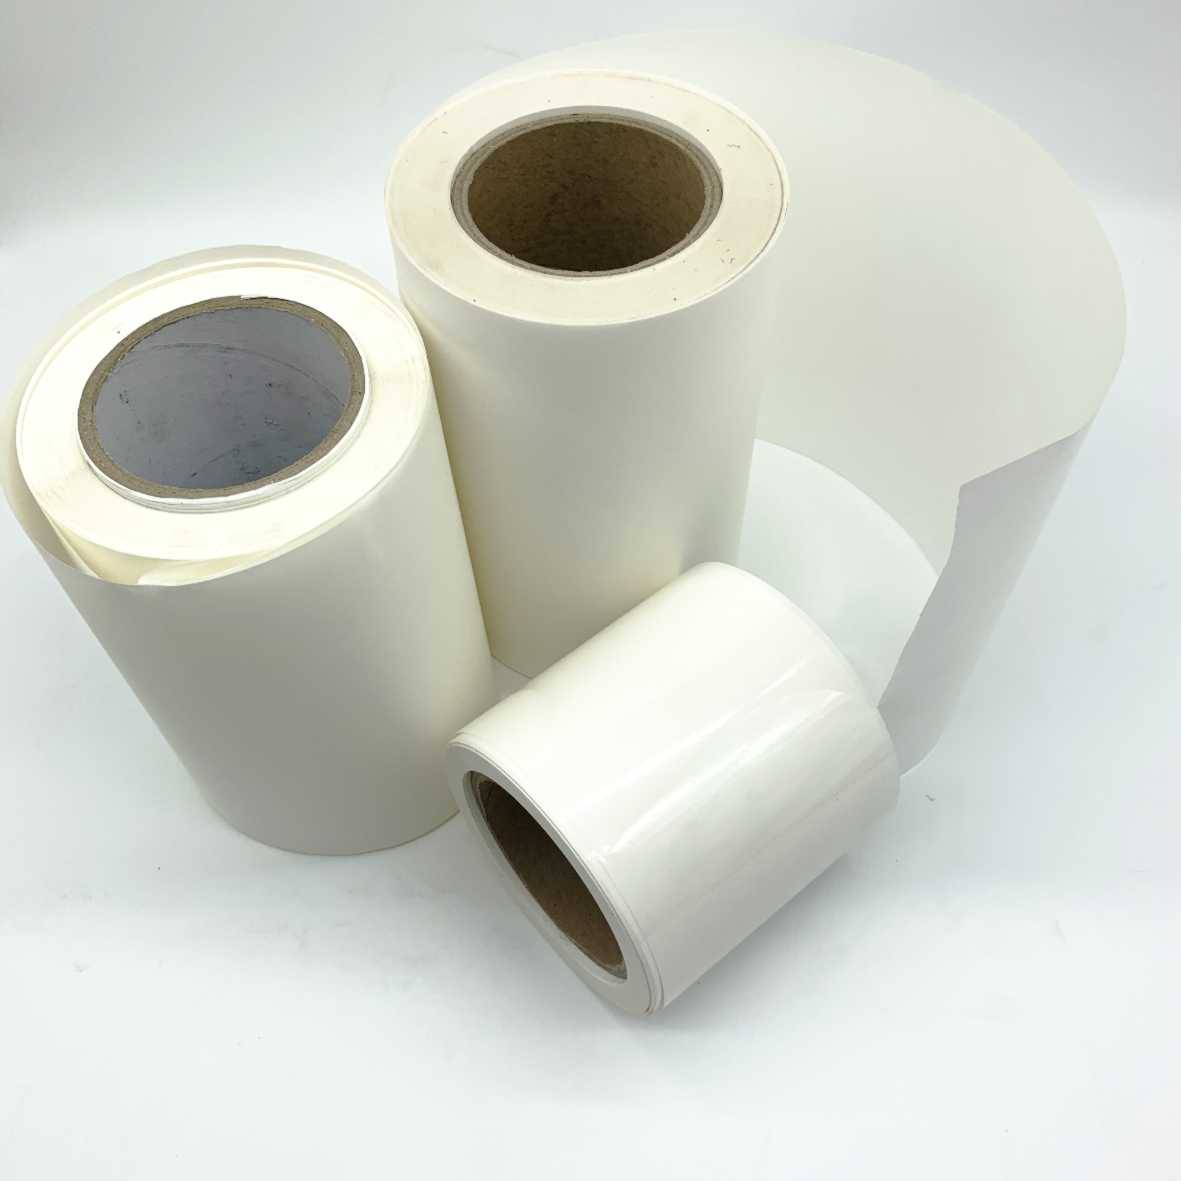 Best Tamper Evident Glossy White Non Transfer Void Label Material,36u Matte White No Residue